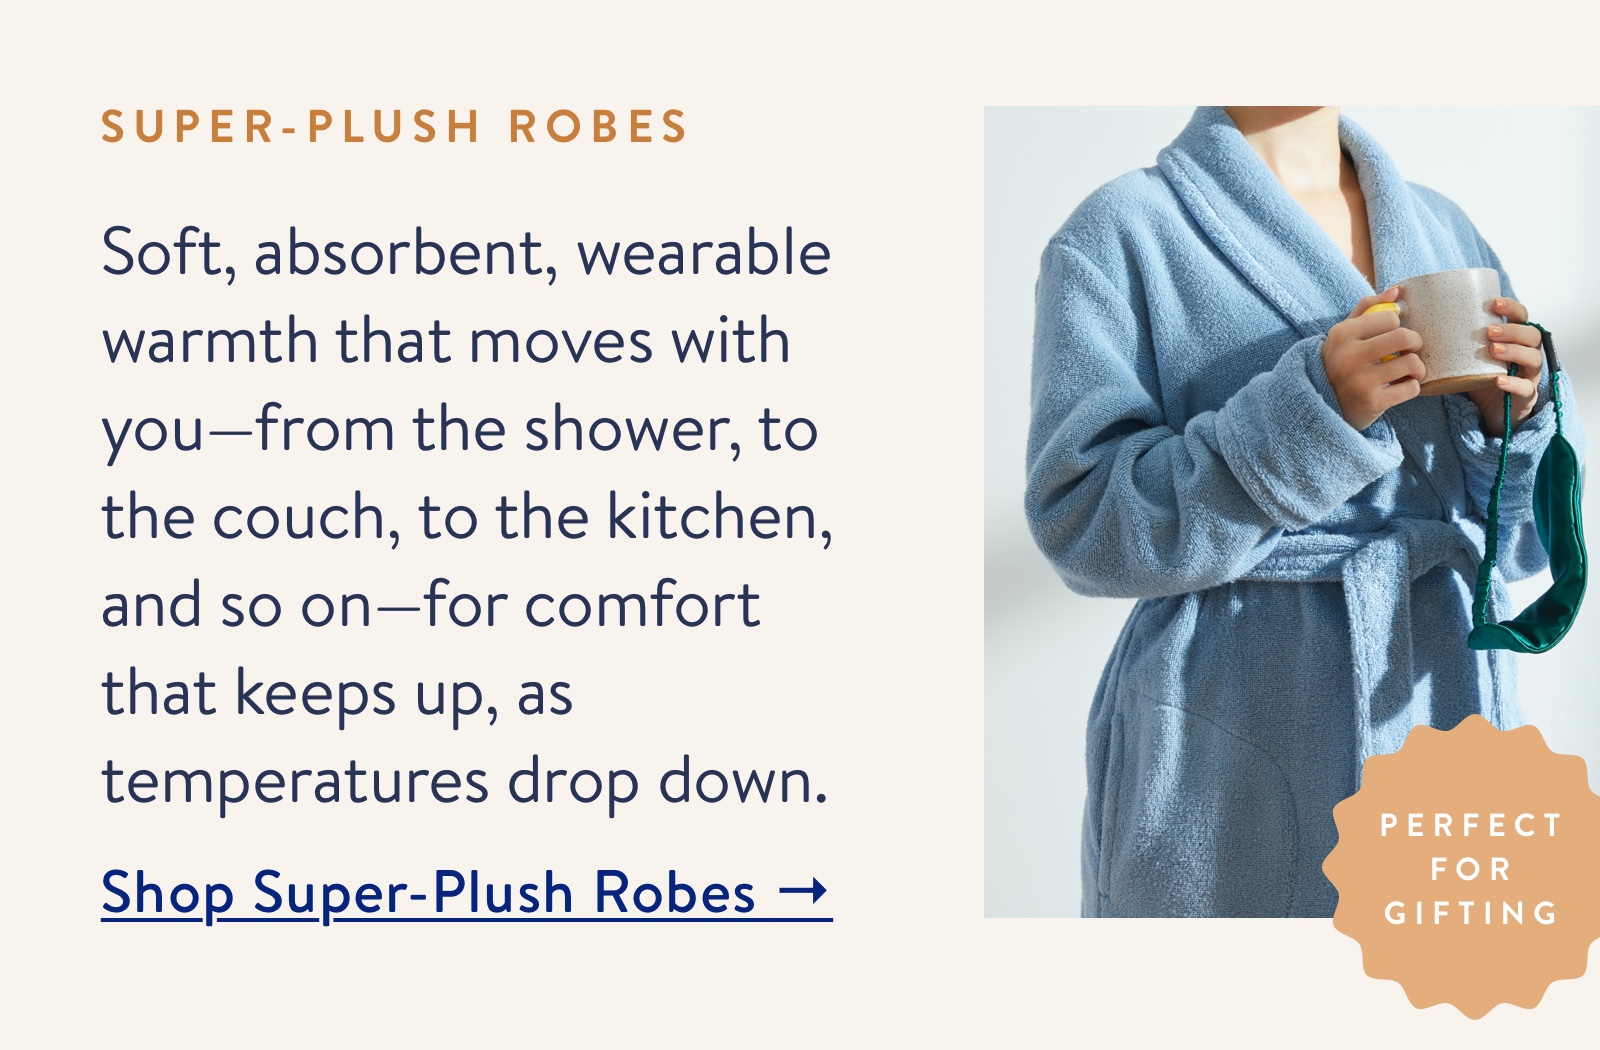 Soft, absorbent, wearable warmth that moves with you. Shop Super-Plush Robes